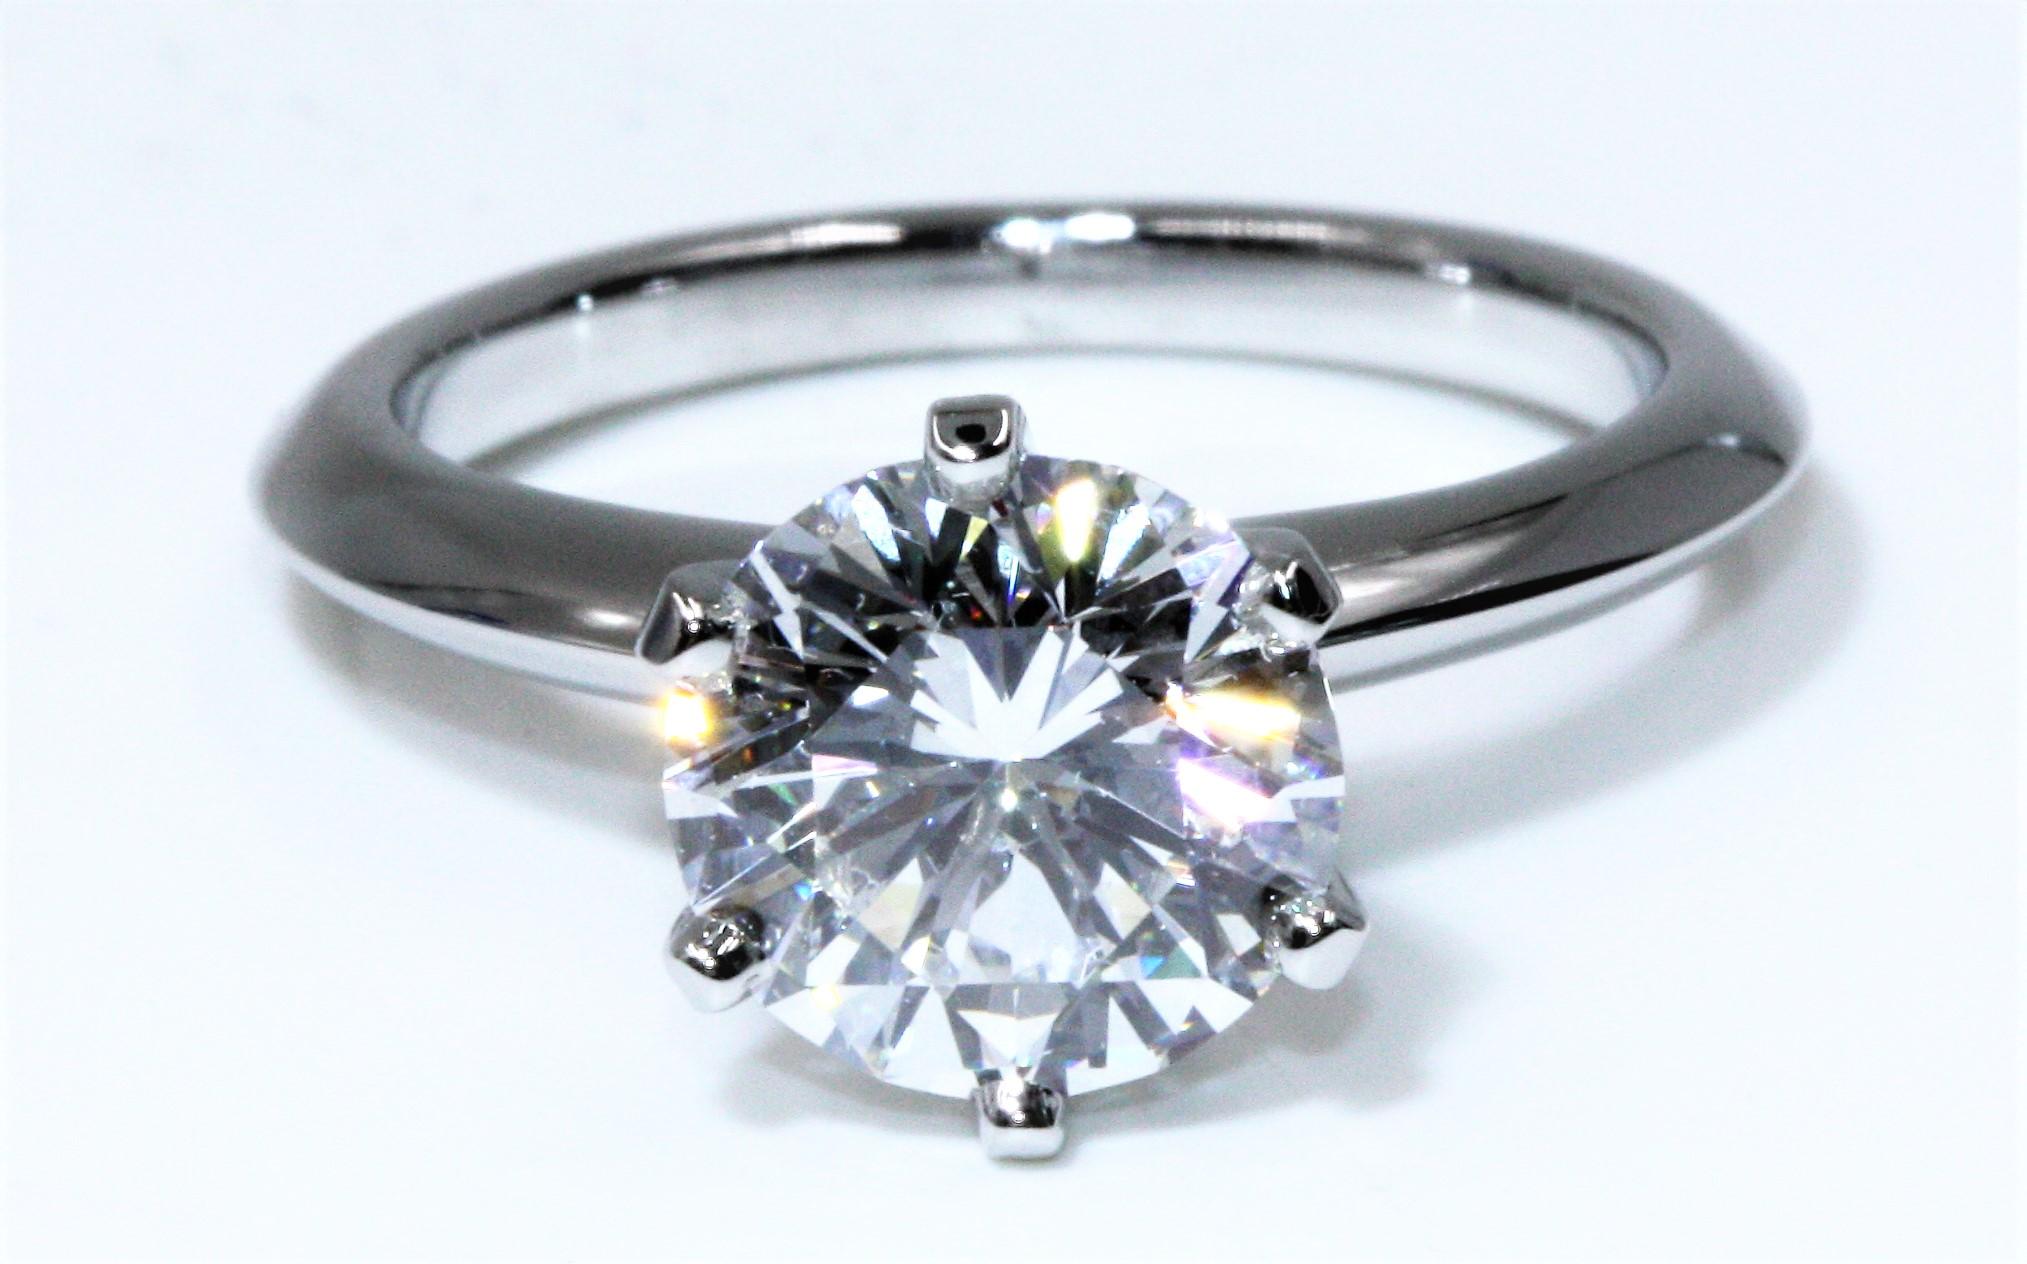 Tiffany & Co. Platinum Diamond Engagement Ring 2.22 Carat, VS1, E In Excellent Condition For Sale In New York, NY